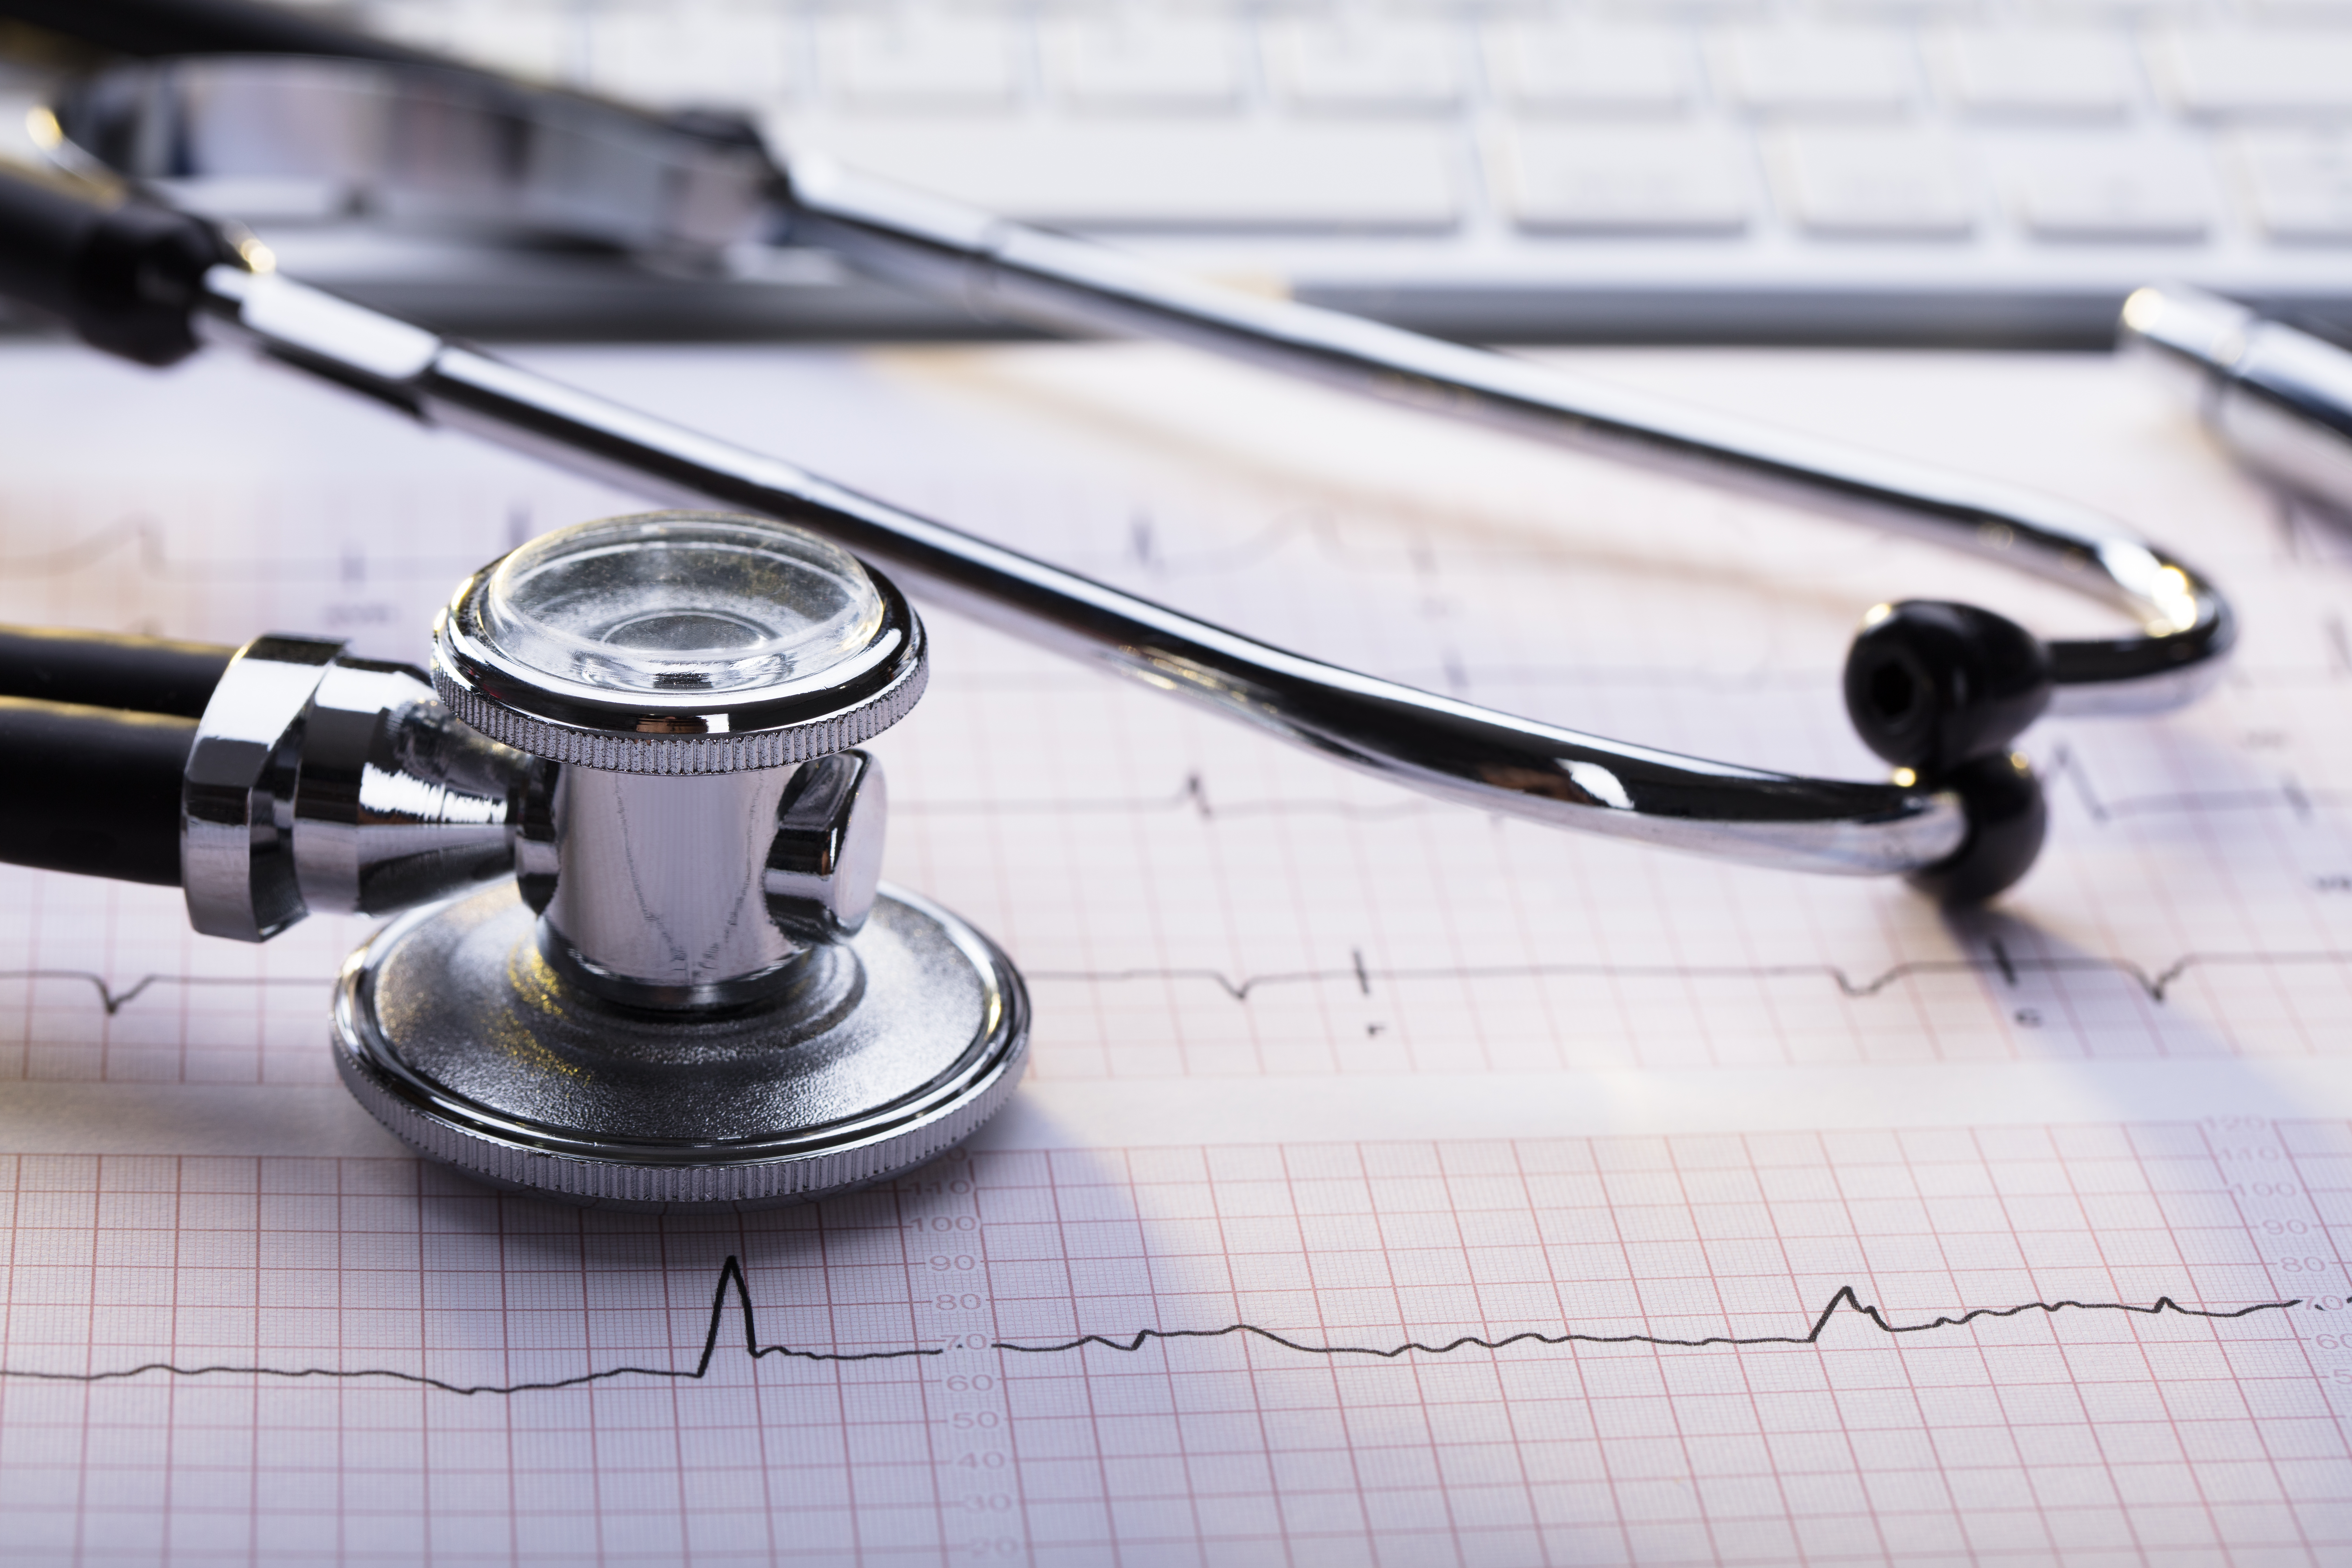 tests required for a cardiology consultation - a stethoscope and an EKG chart